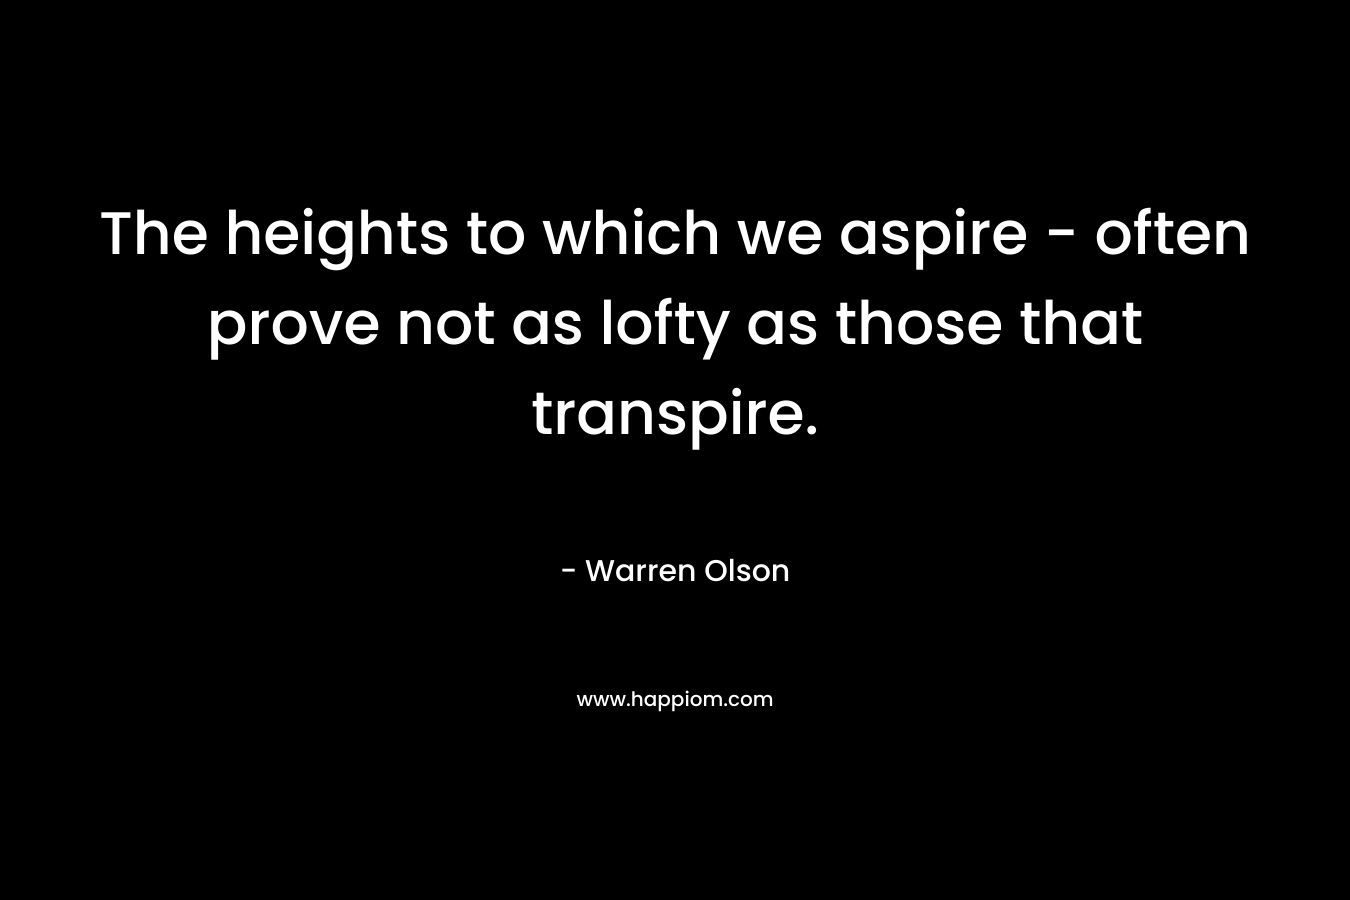 The heights to which we aspire – often prove not as lofty as those that transpire. – Warren Olson